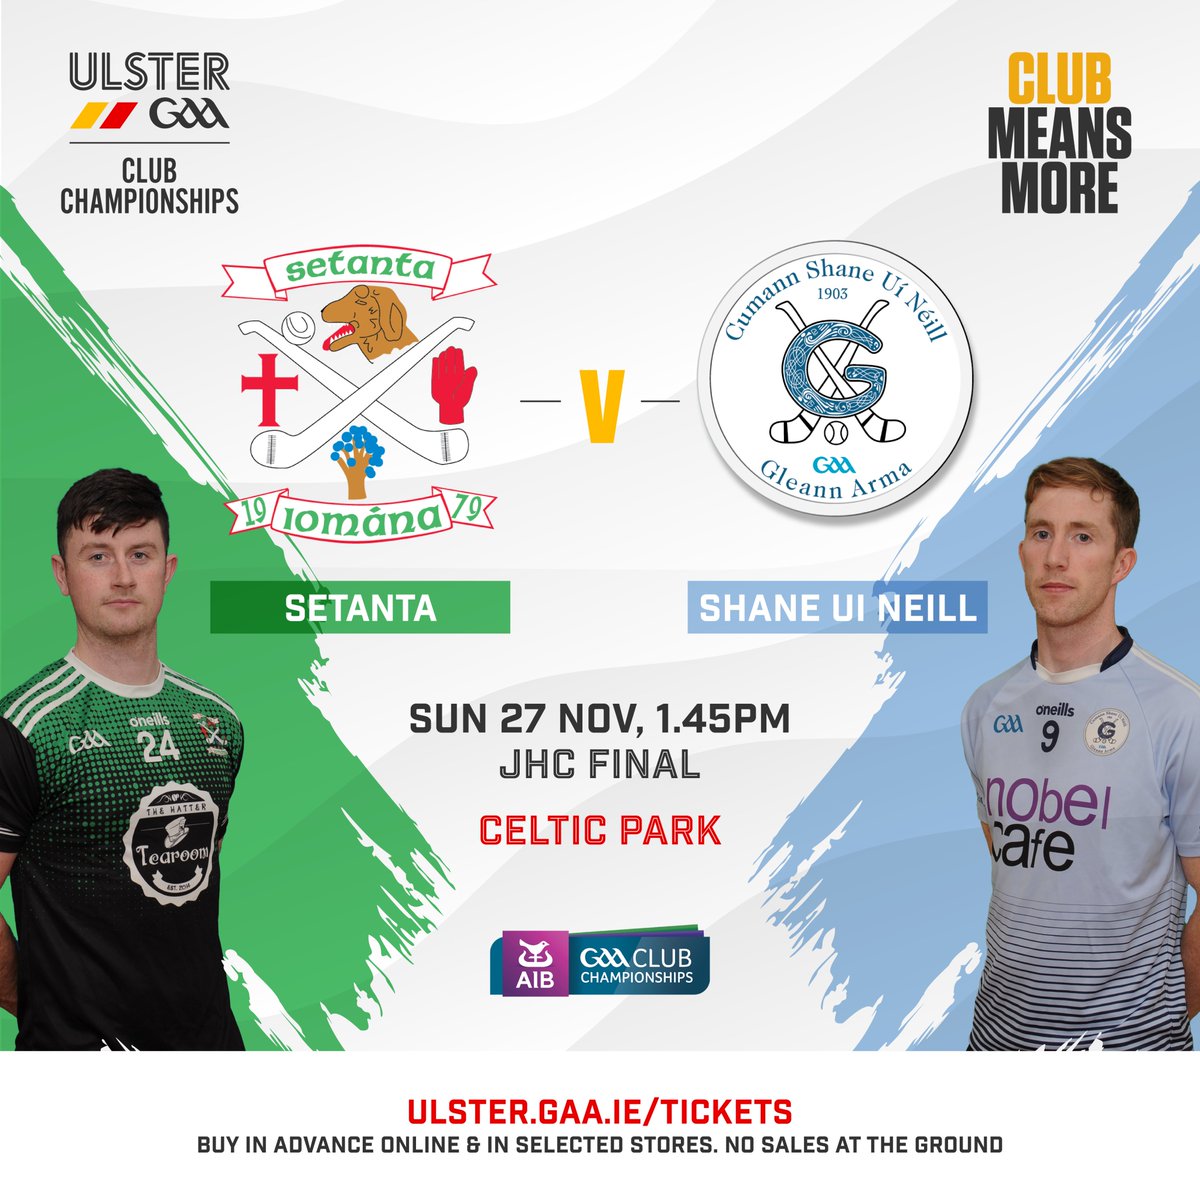 ⚾️ @AIB_GAA #UlsterClub2022 JHC Final🏆 @SetantaHC v @ShaneUiNeill Celtic Park Sun 27th Nov, 1.45pm 📣 Tickets must be bought in advance online or in selected stores. No cash sales at the venue 🎟️ Buy here▶️ bit.ly/3U2ub8H #ClubMeansMore